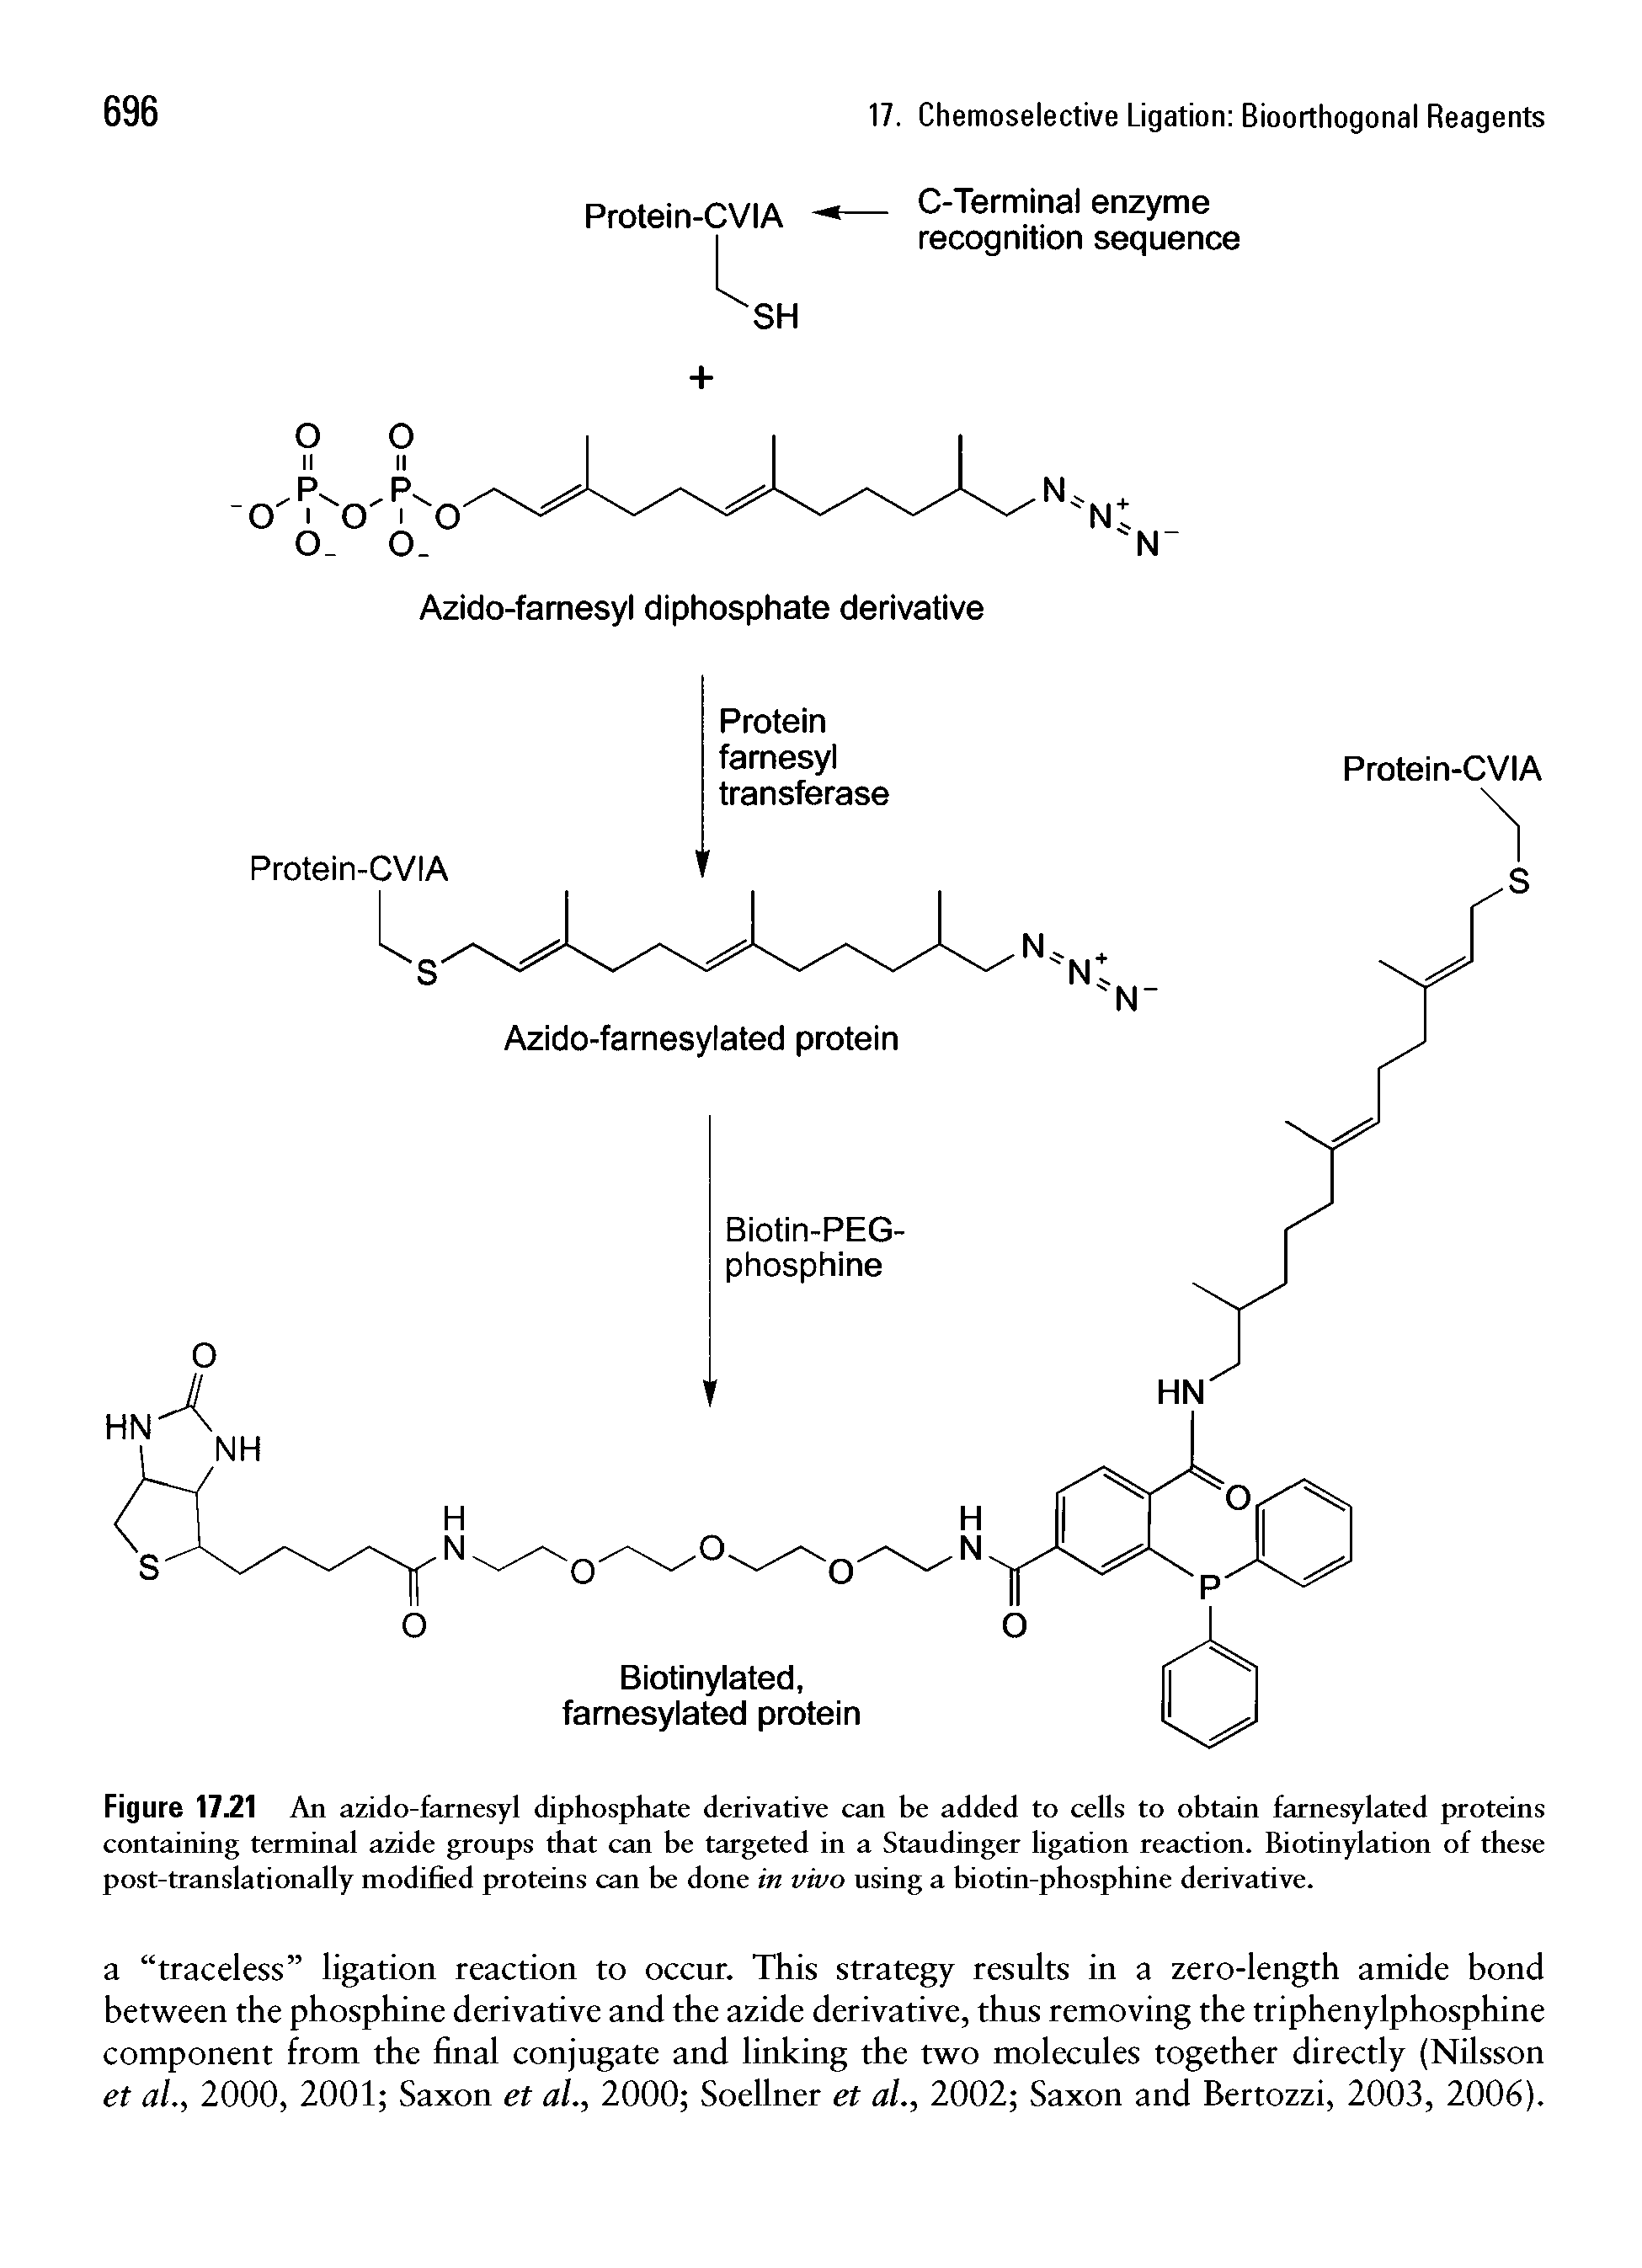 Figure 17.21 An azido-farnesyl diphosphate derivative can be added to cells to obtain farnesylated proteins containing terminal azide groups that can be targeted in a Staudinger ligation reaction. Biotinylation of these post-translationally modified proteins can be done in vivo using a biotin-phosphine derivative.